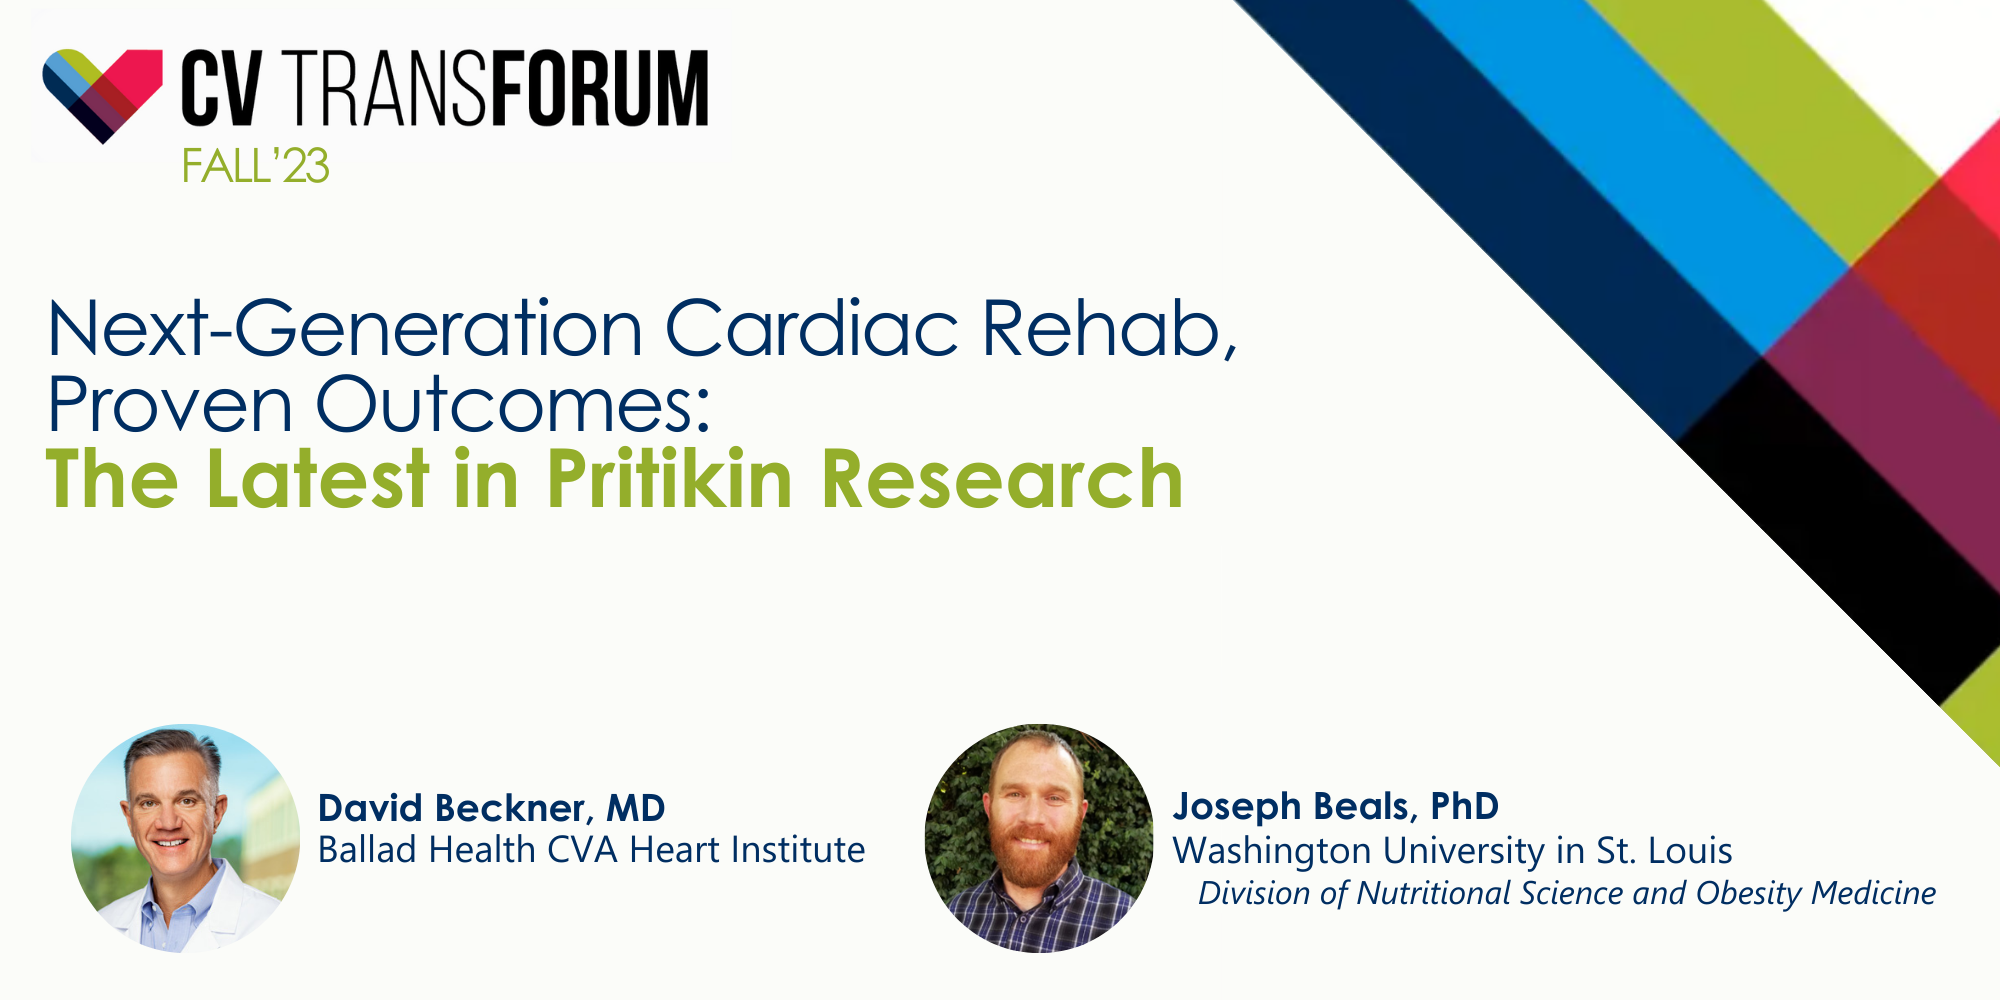 Text reads: CV Transforum, Fall 2023 / Next-Generation Cardiac Rehab,  Proven Outcomes:  The Latest in Pritikin Research / David Beckner, MD and Joseph Beals, PhD - both have a small photo next to their names and titles